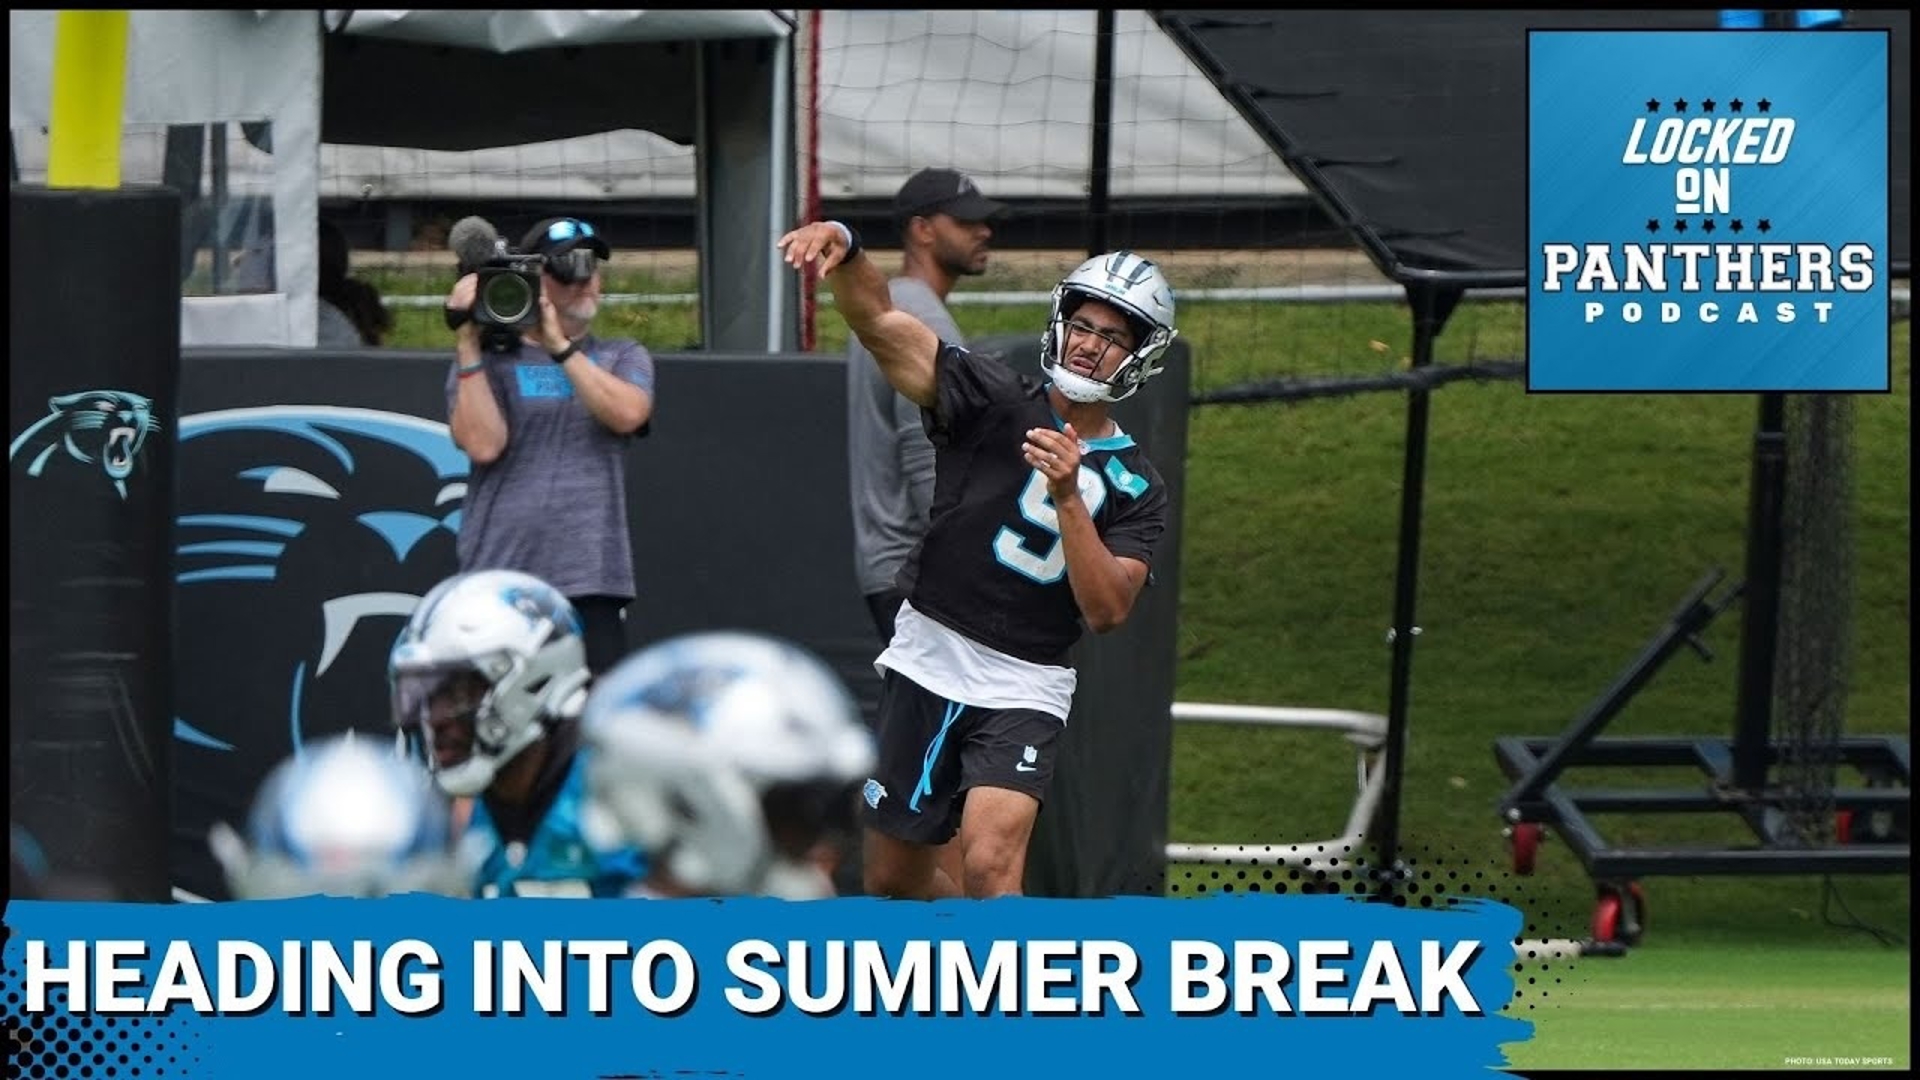 Now that the Carolina Panthers are off to summer break, Julian Council answers listener questions to take the pulse of the fan base.